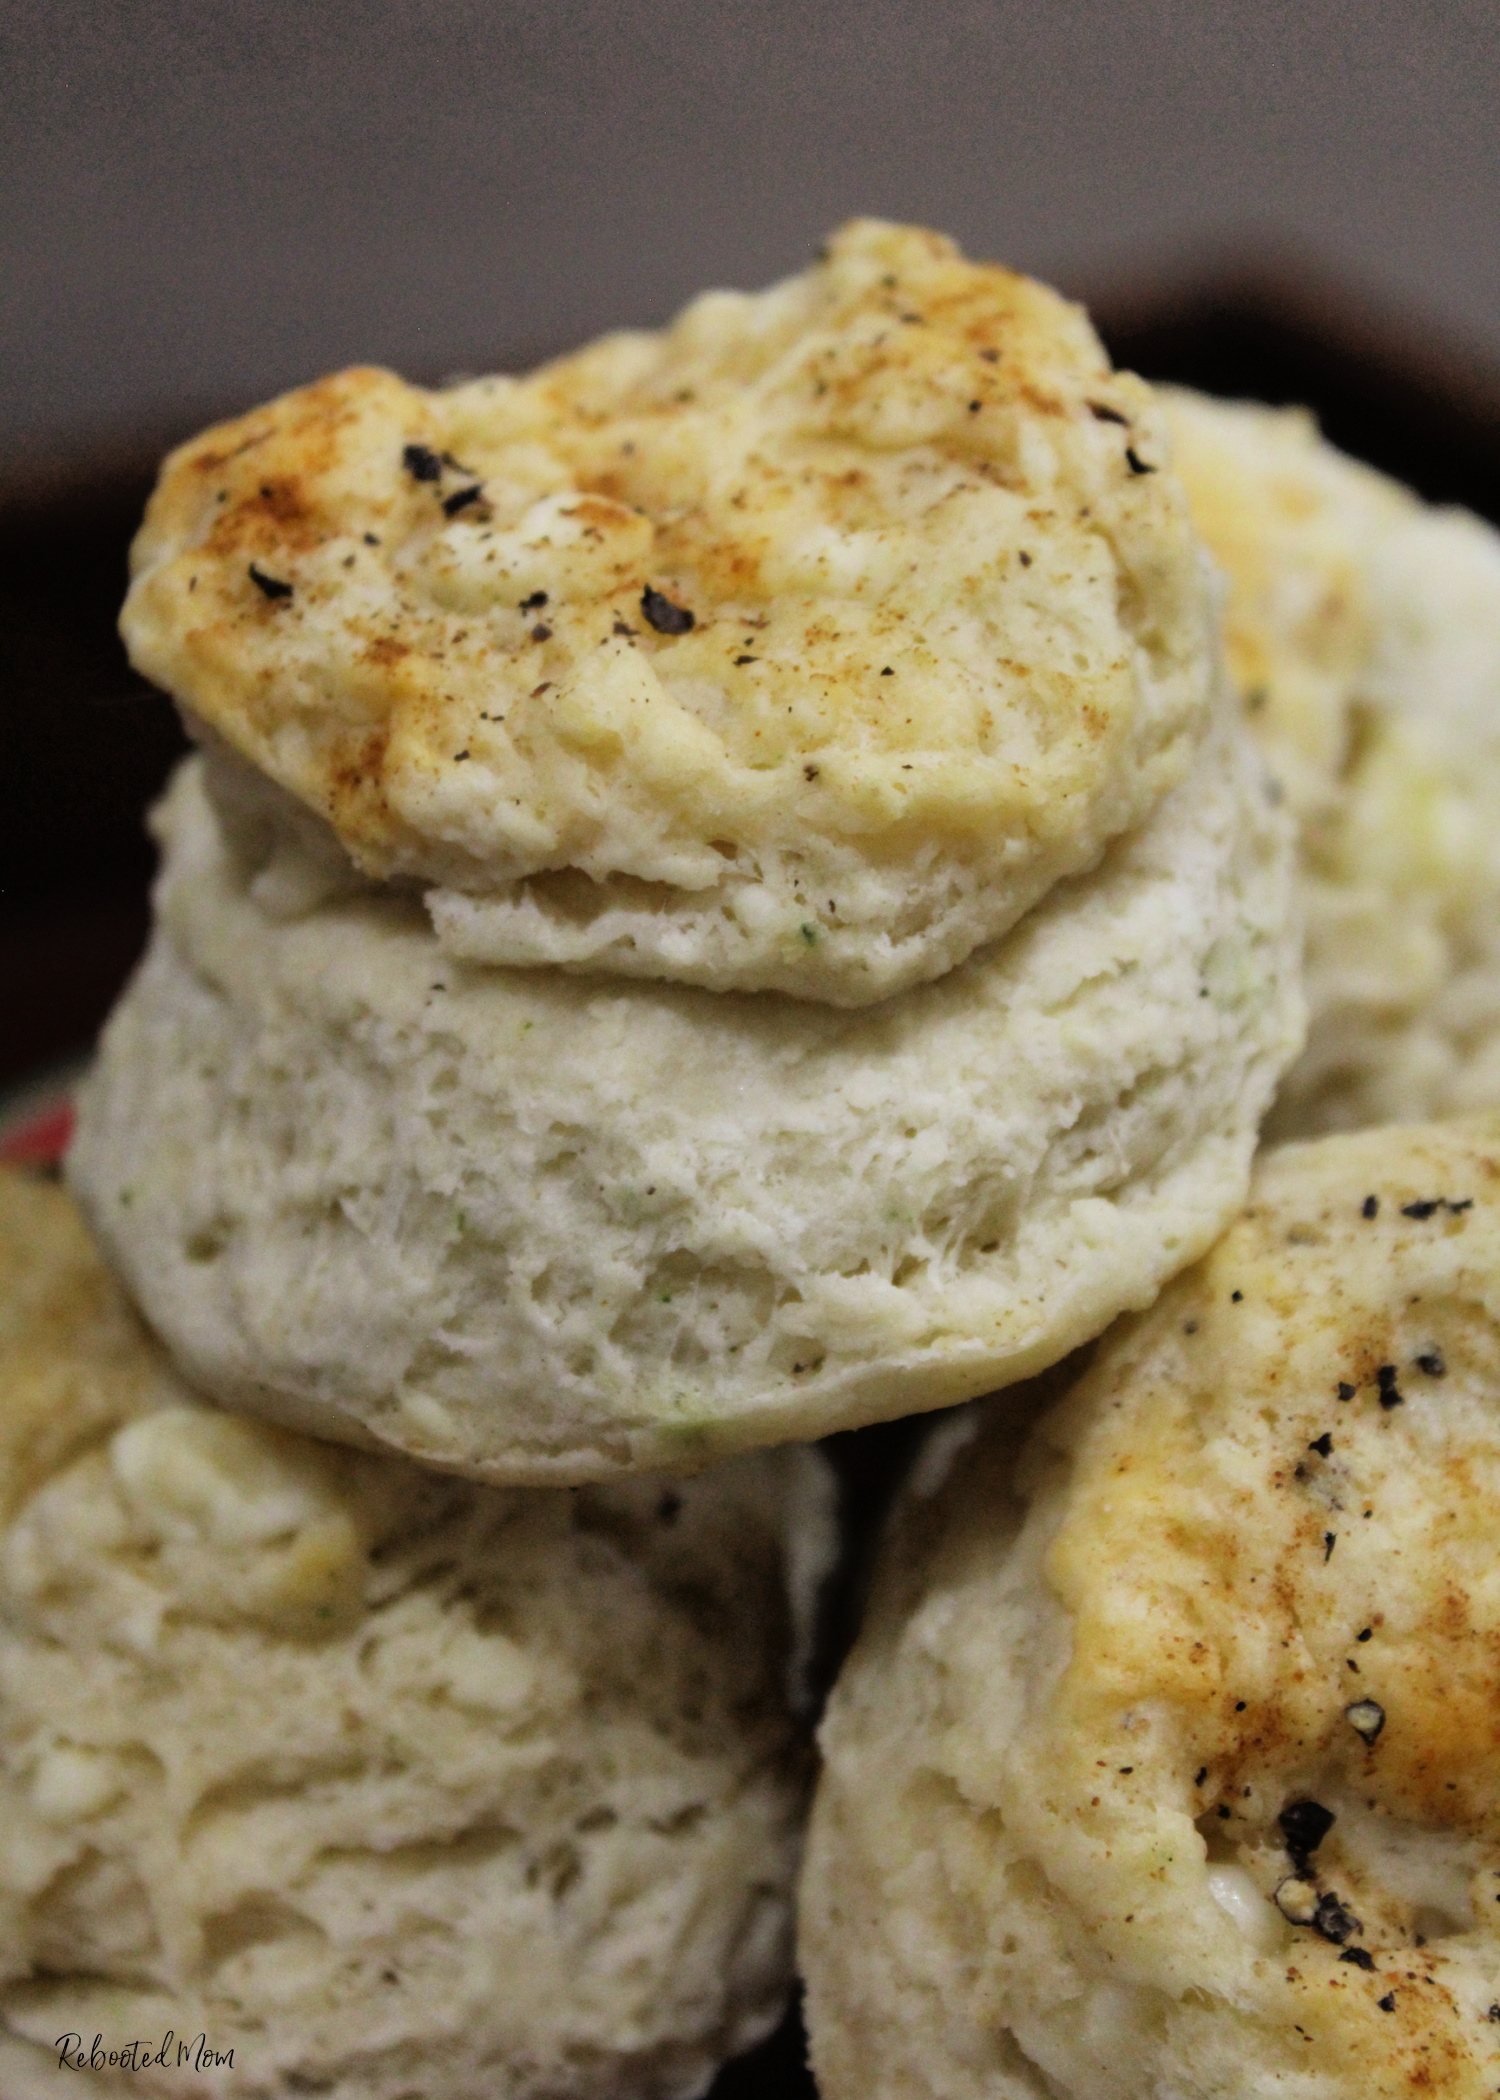 Feta Cheese Biscuits